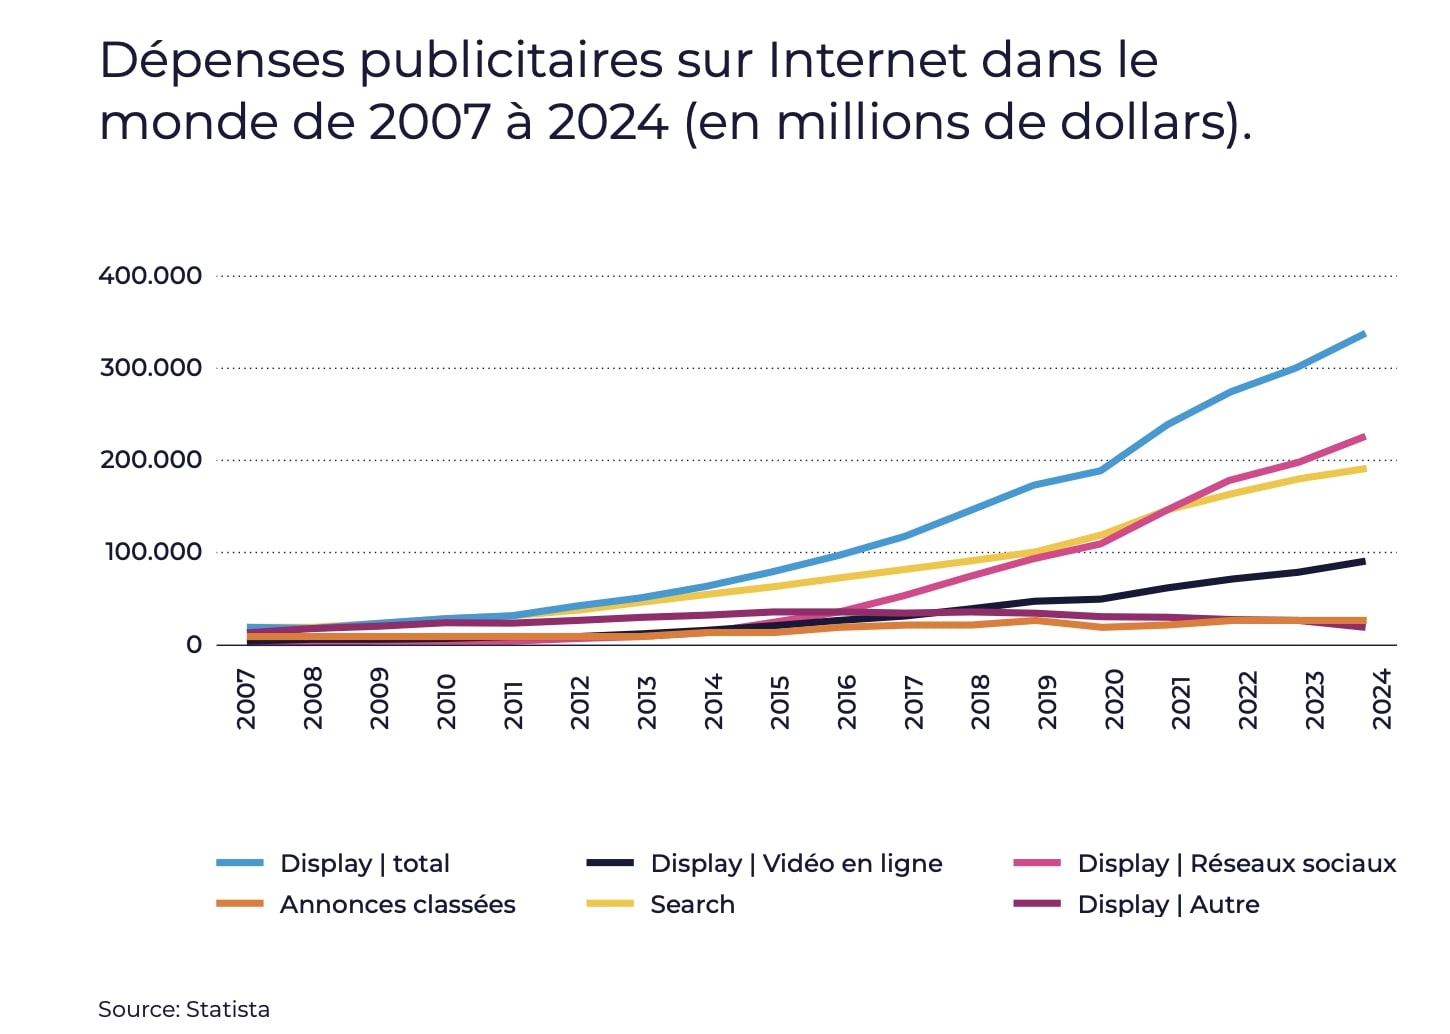 Worldwide internet advertising spending from 2007 to 2024 (in millions of dollars): increased